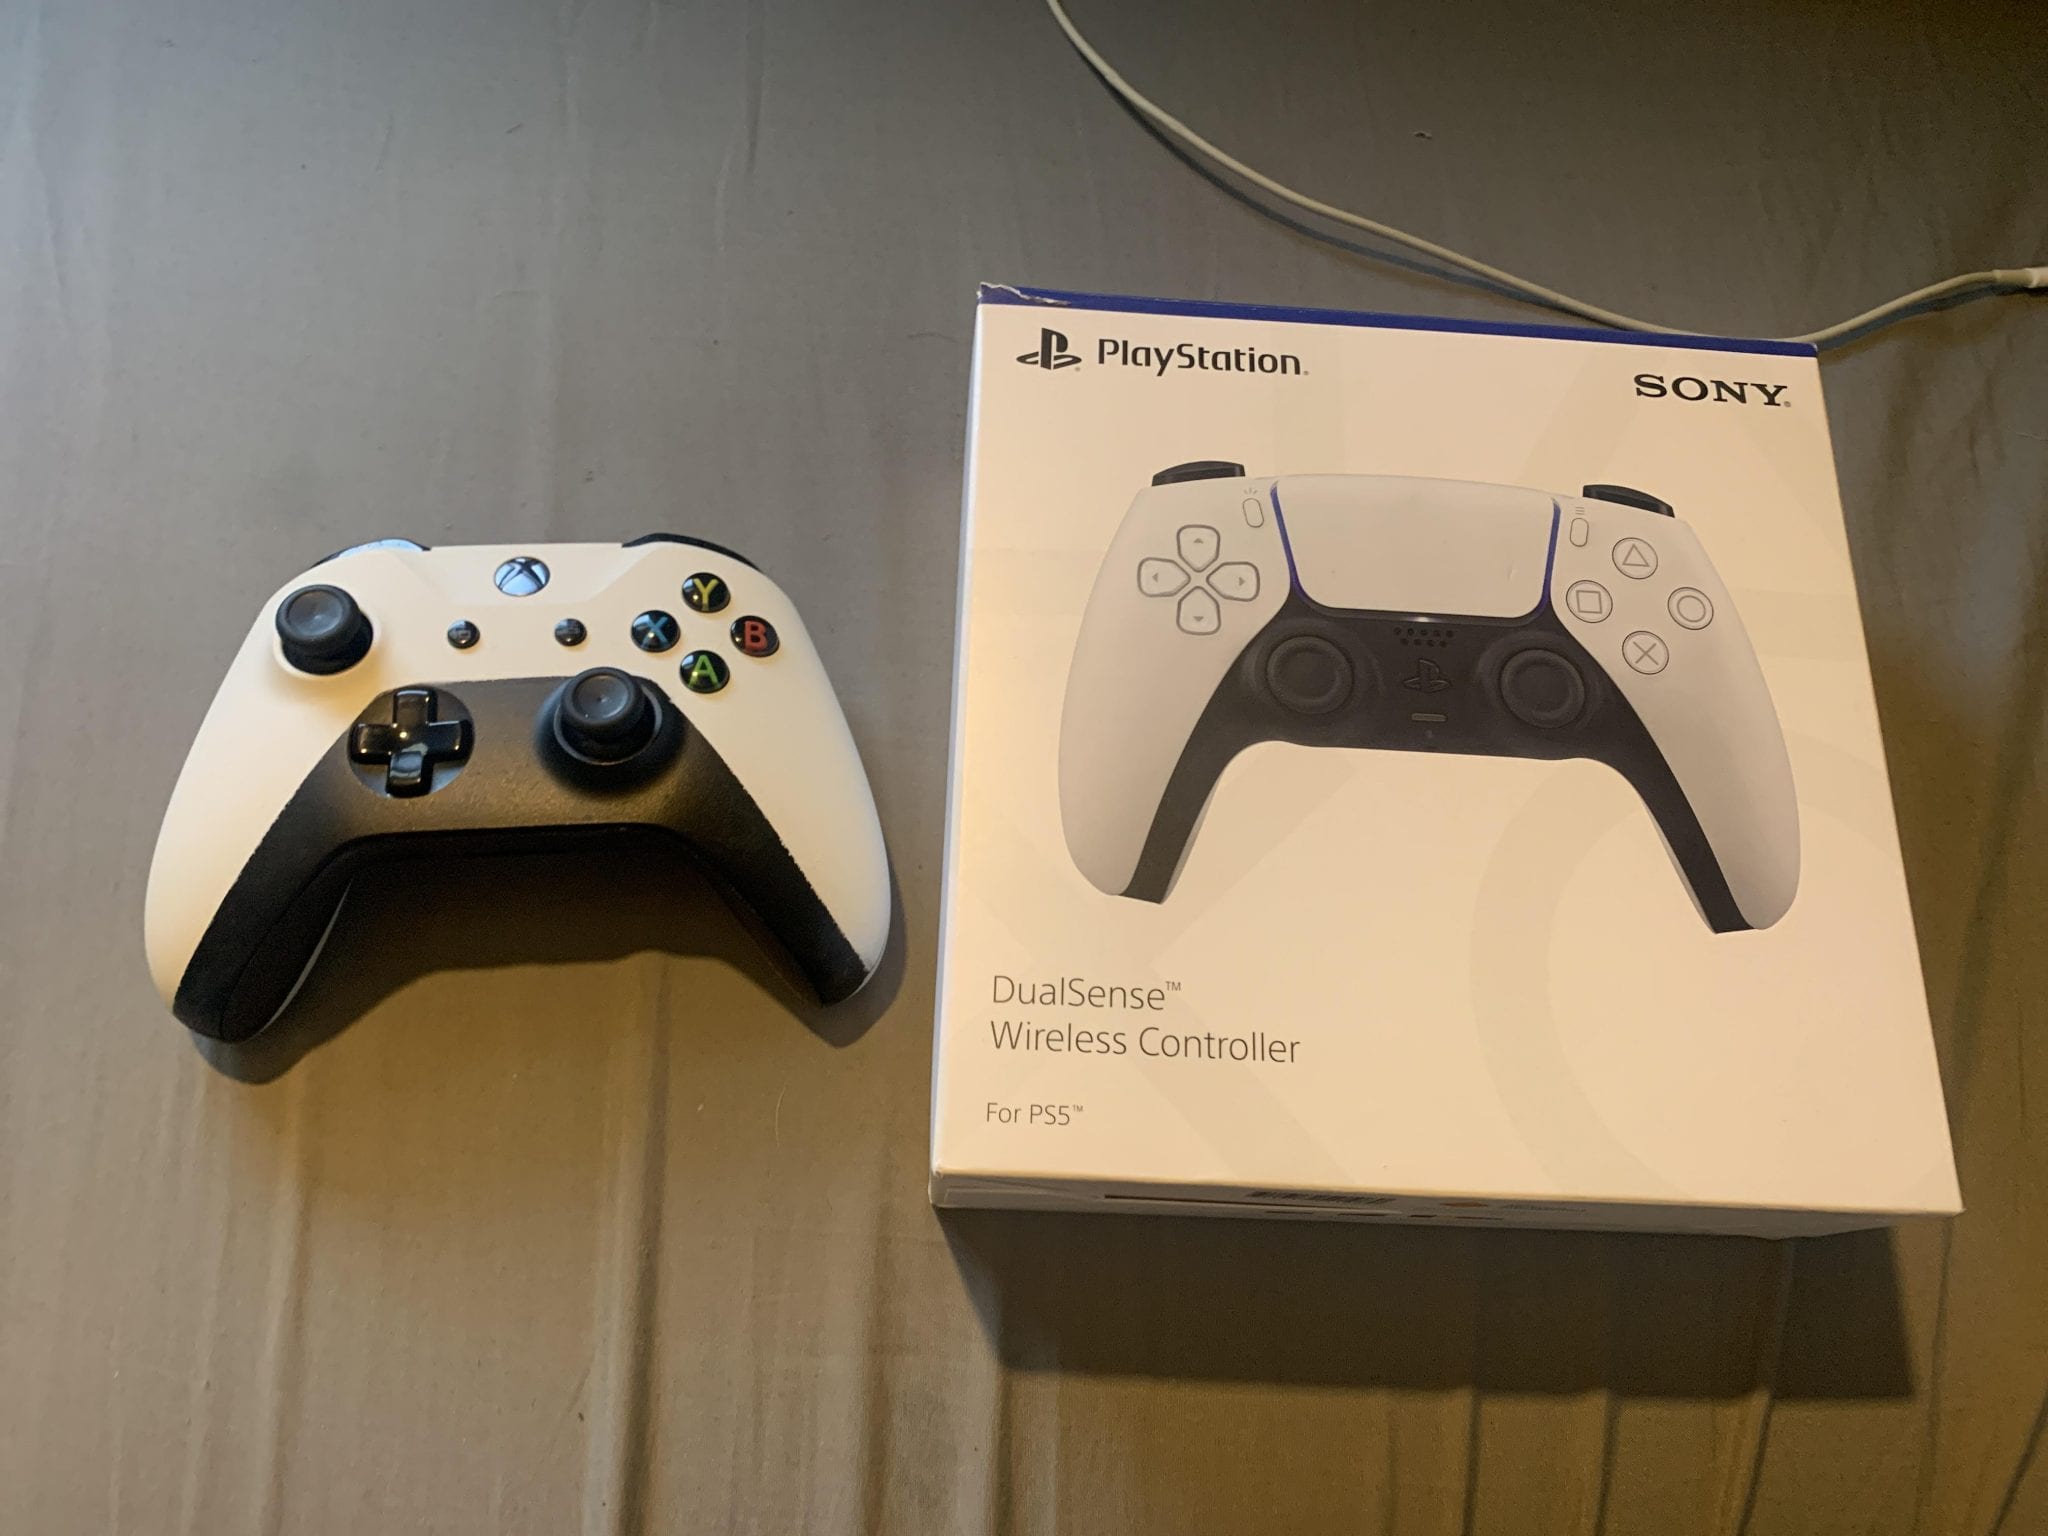 Player cheated after buying Xbox controller painted as PS5 Dualsense